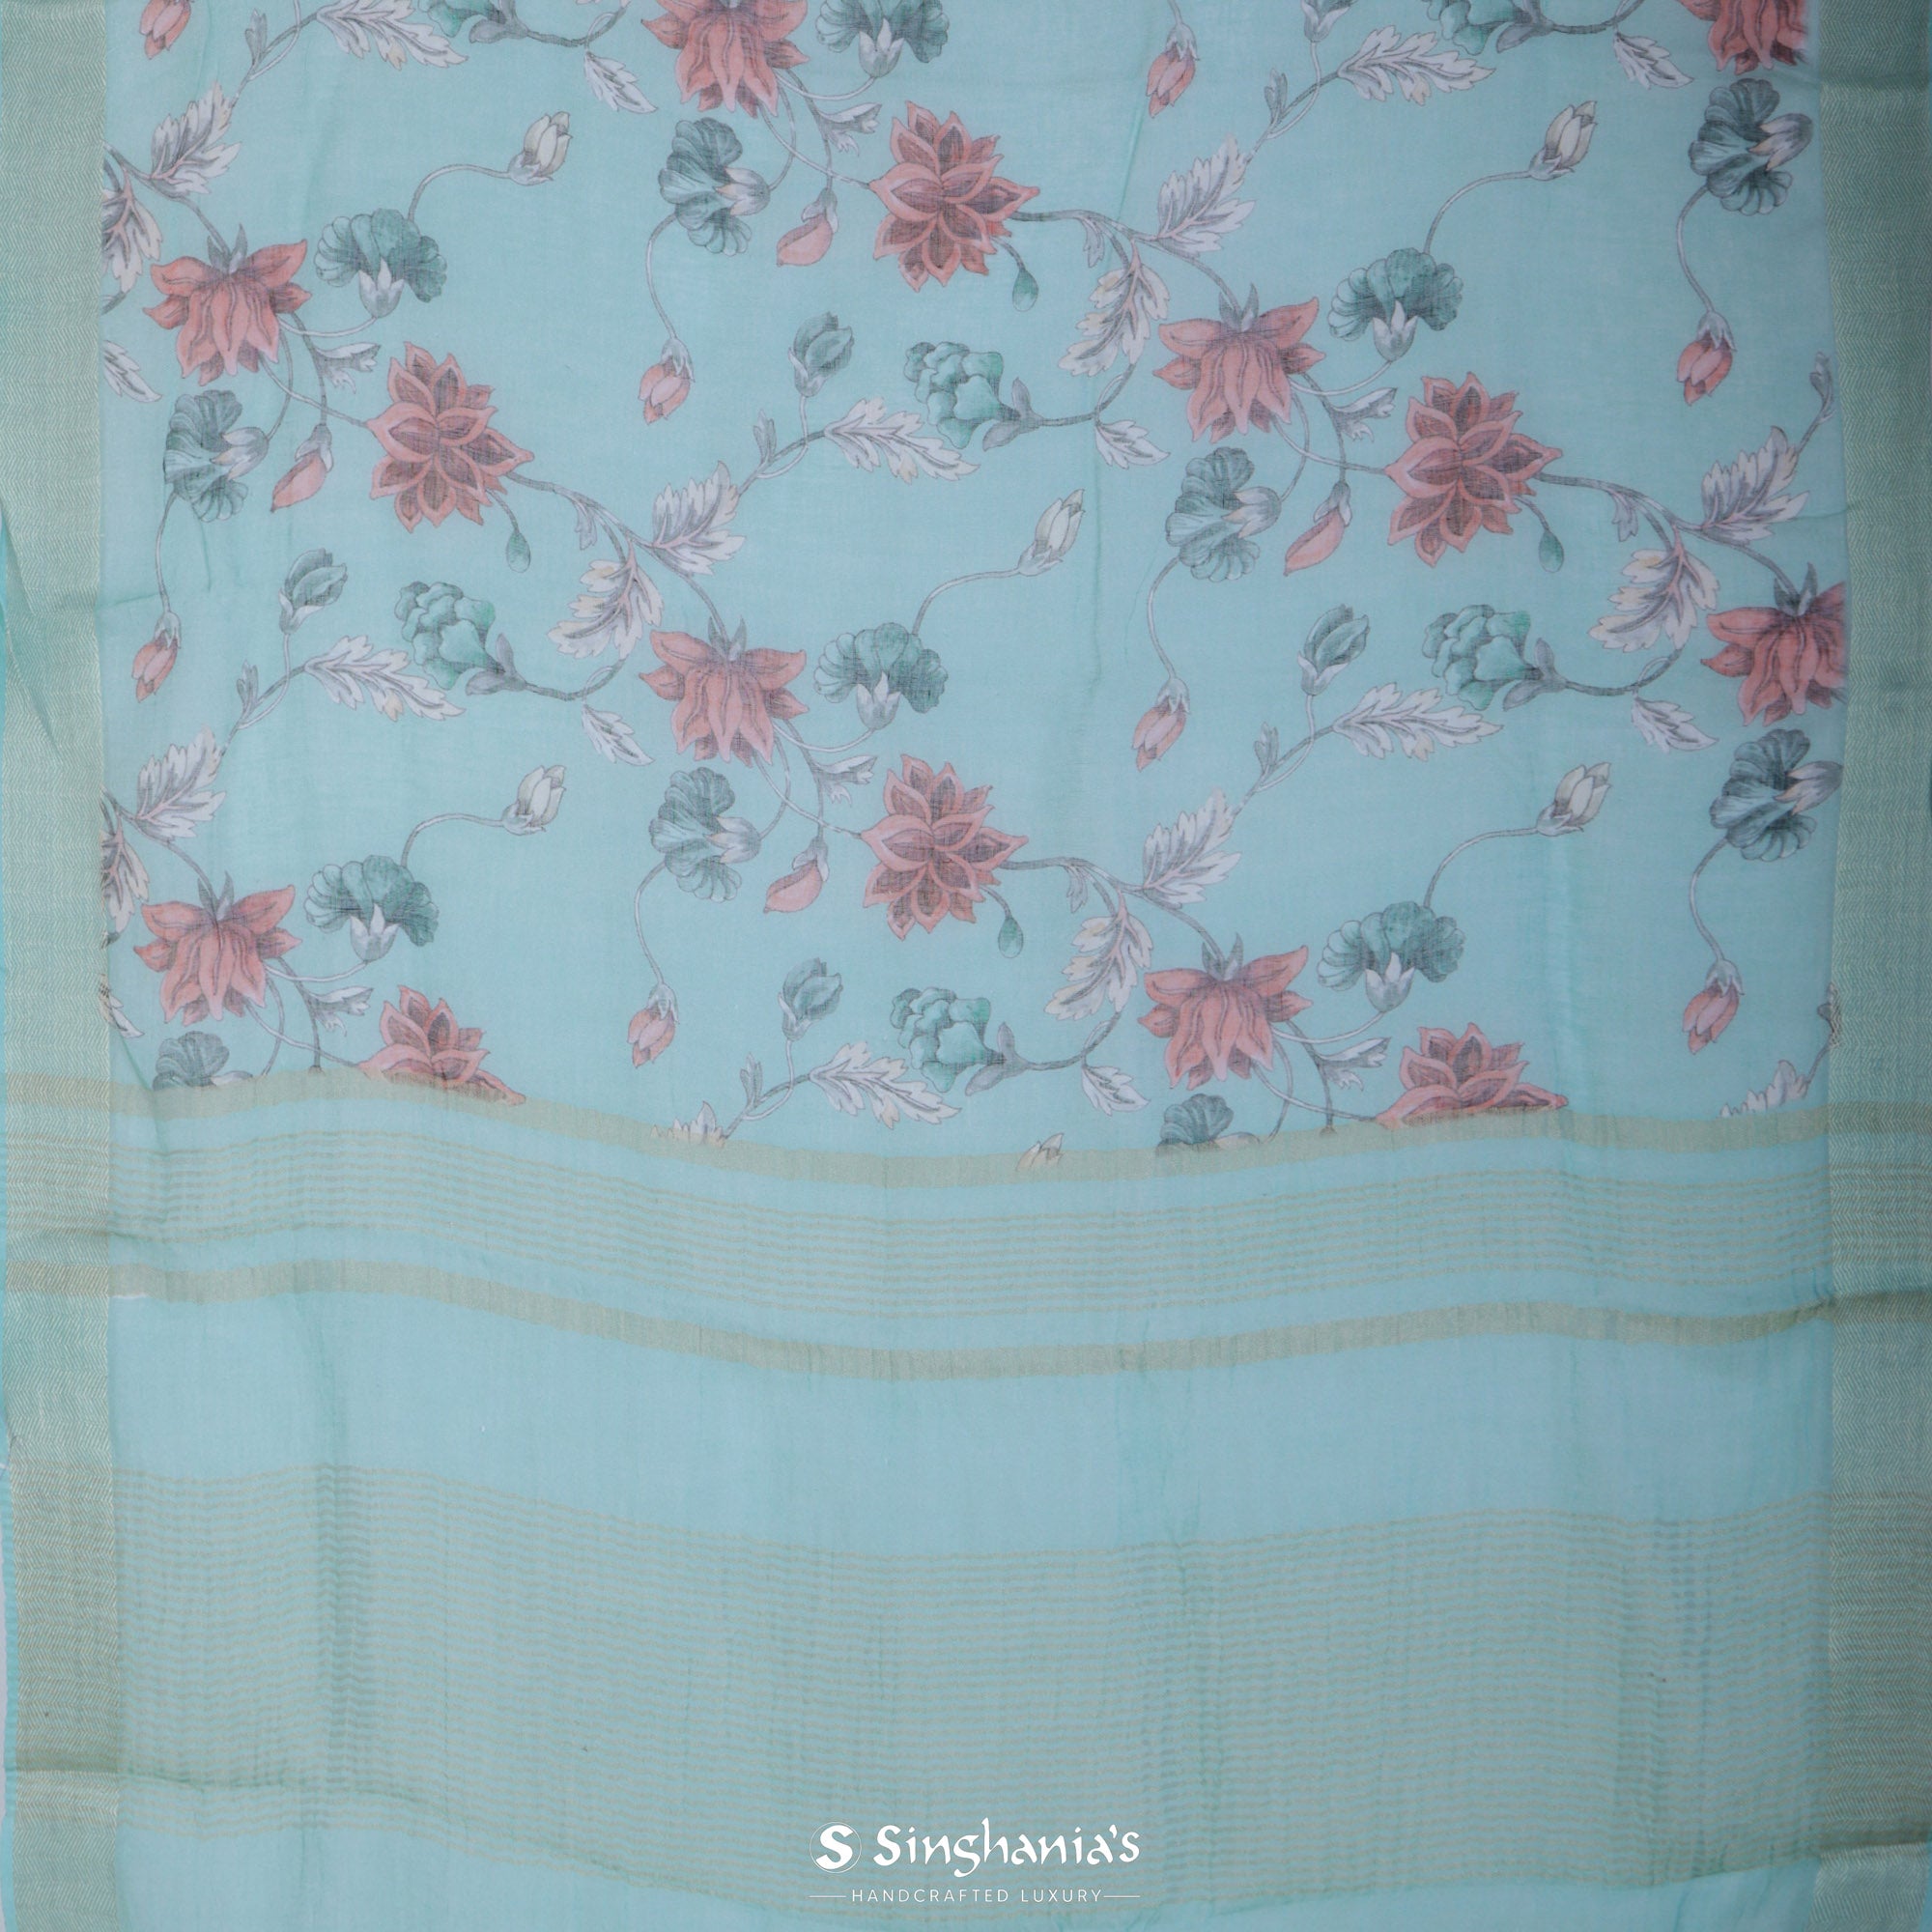 Tiffany Blue Printed Linen Saree With Floral Jaal Pattern